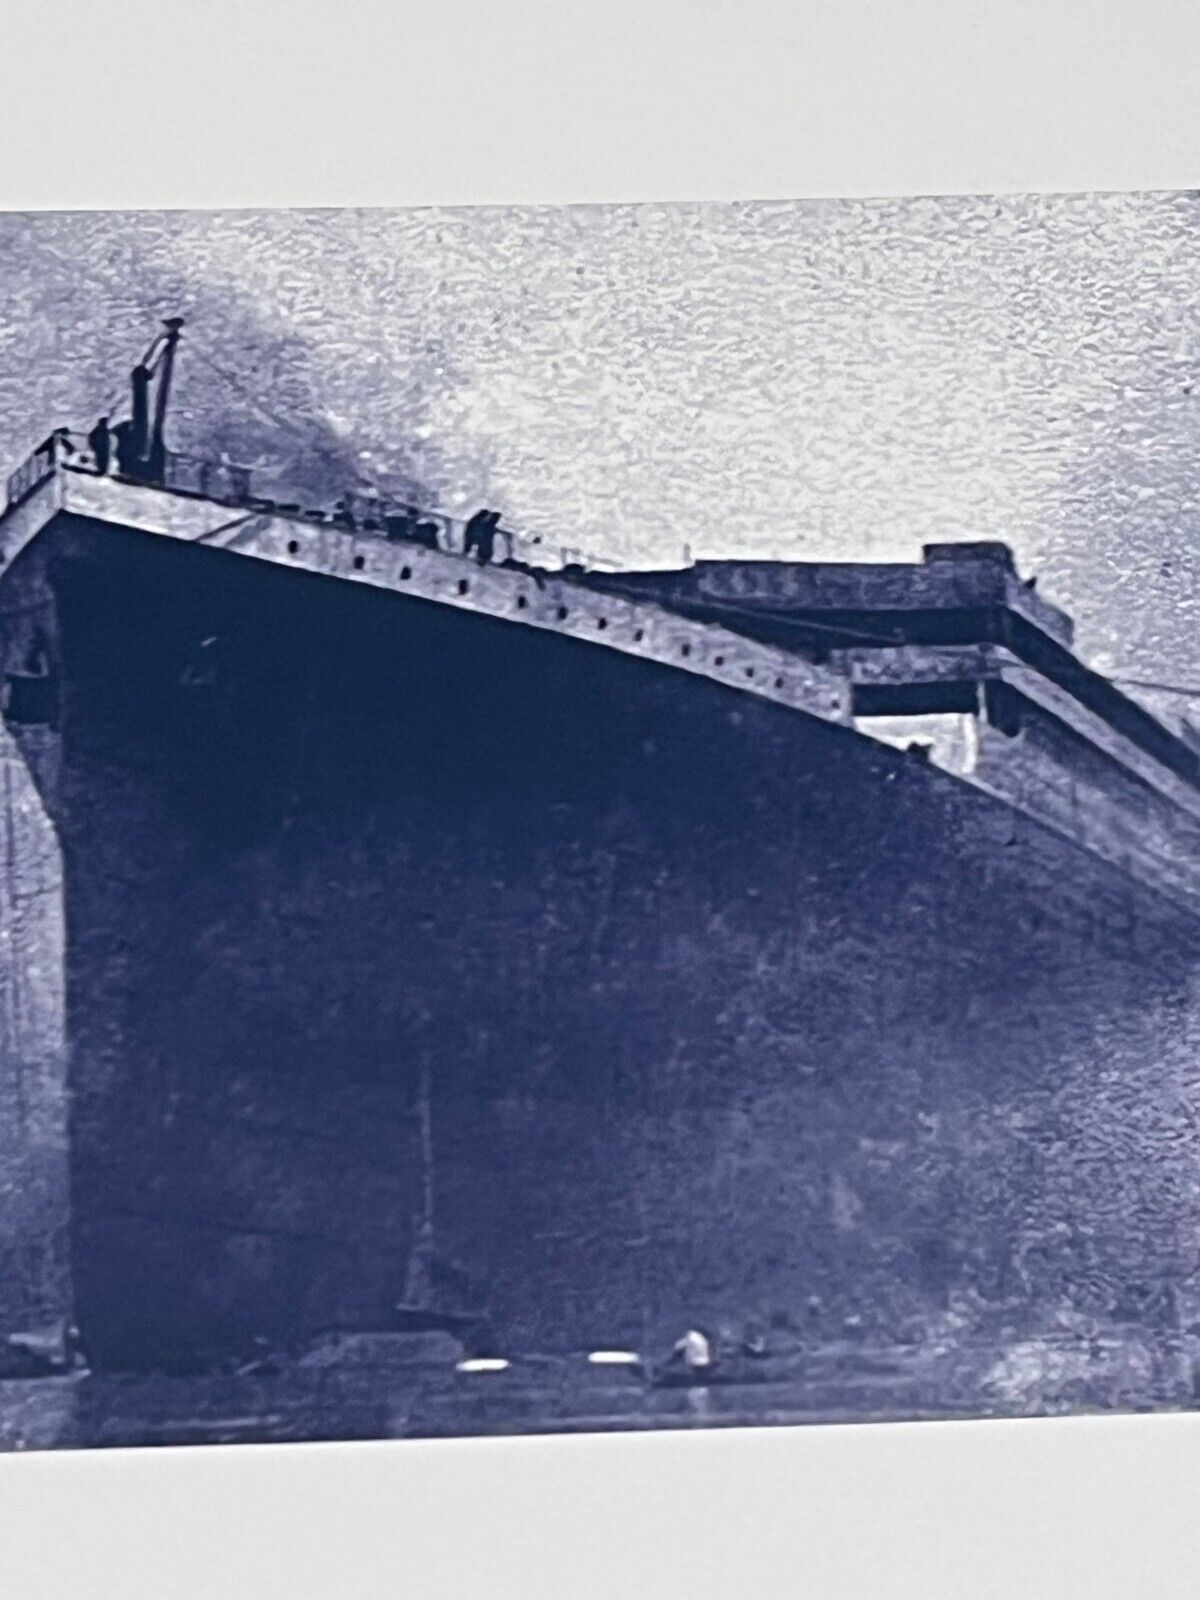 RMS TITANIC LAUNCH MAY 31, 1911, CLIMBING OUT OF THE MIST PHOTO REPRINT HQ PRINT Без бренда - фотография #3